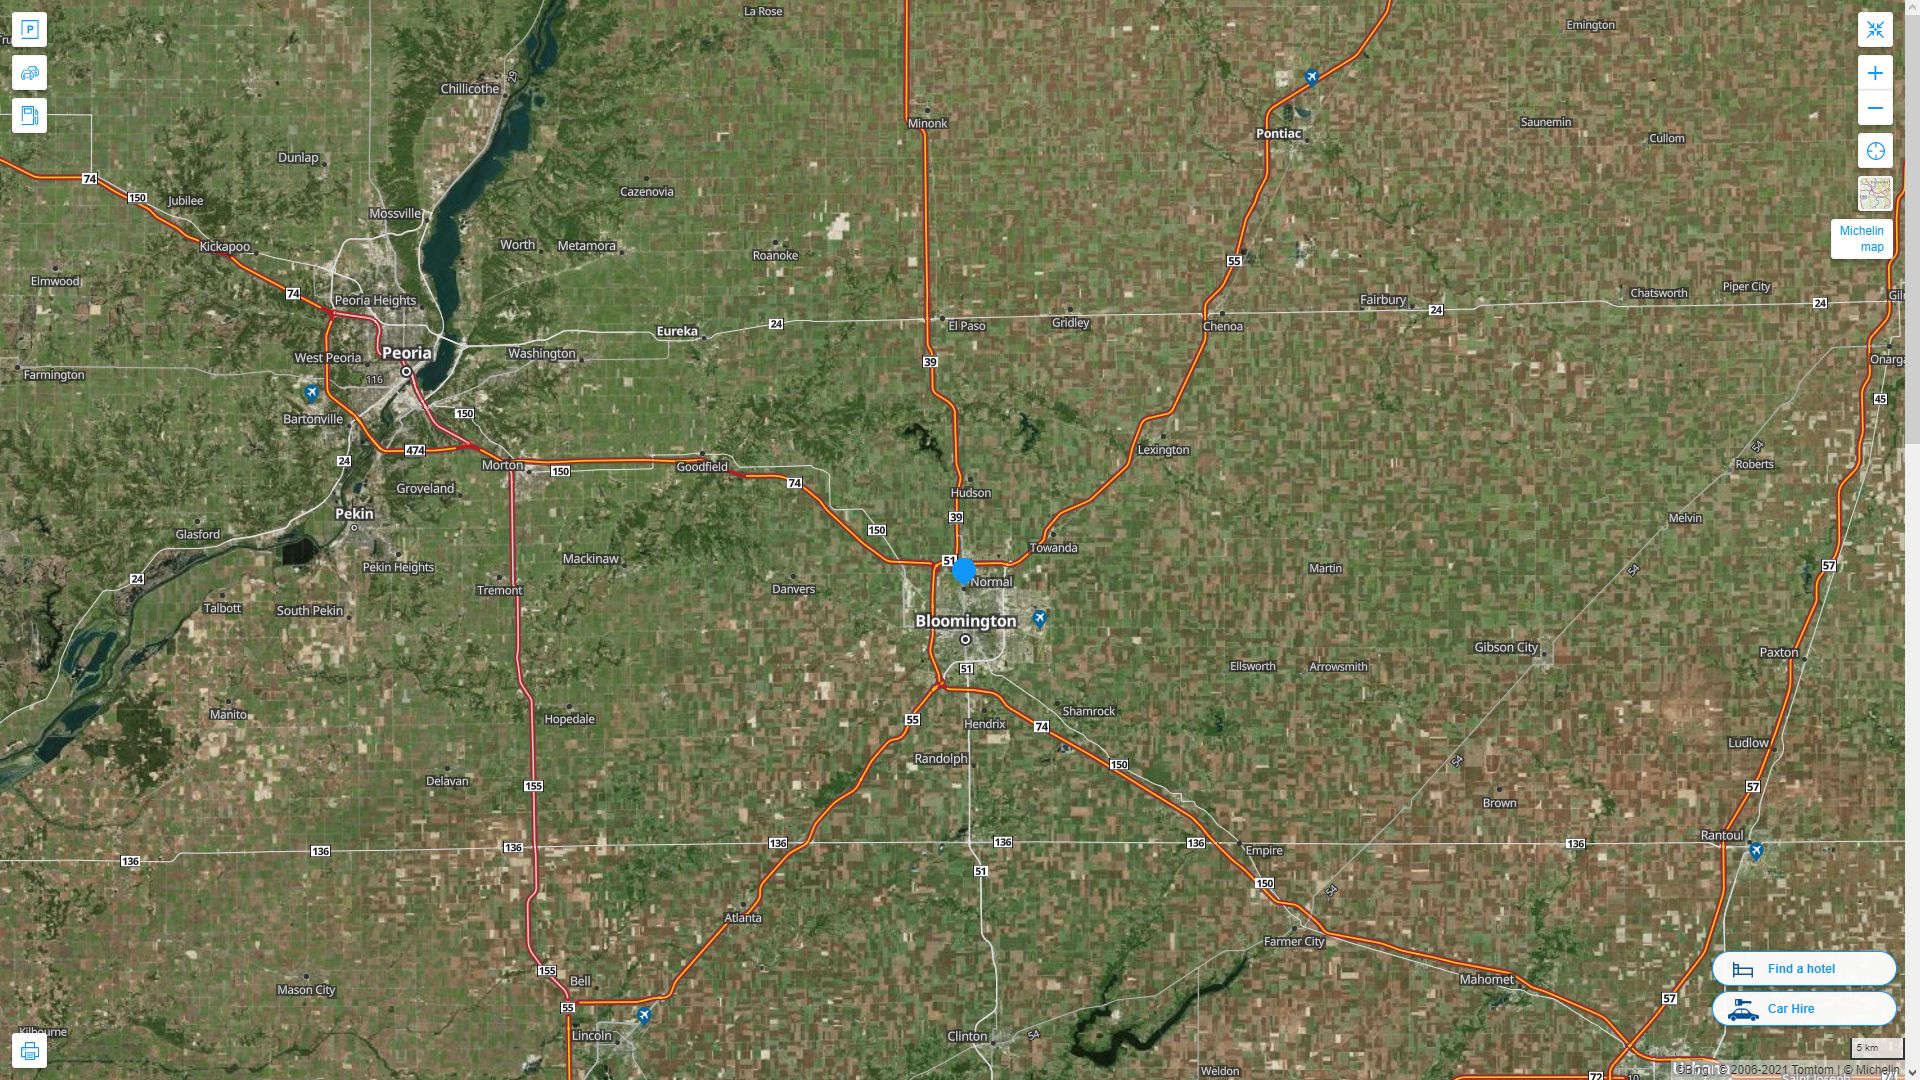 Normal illinois Highway and Road Map with Satellite View